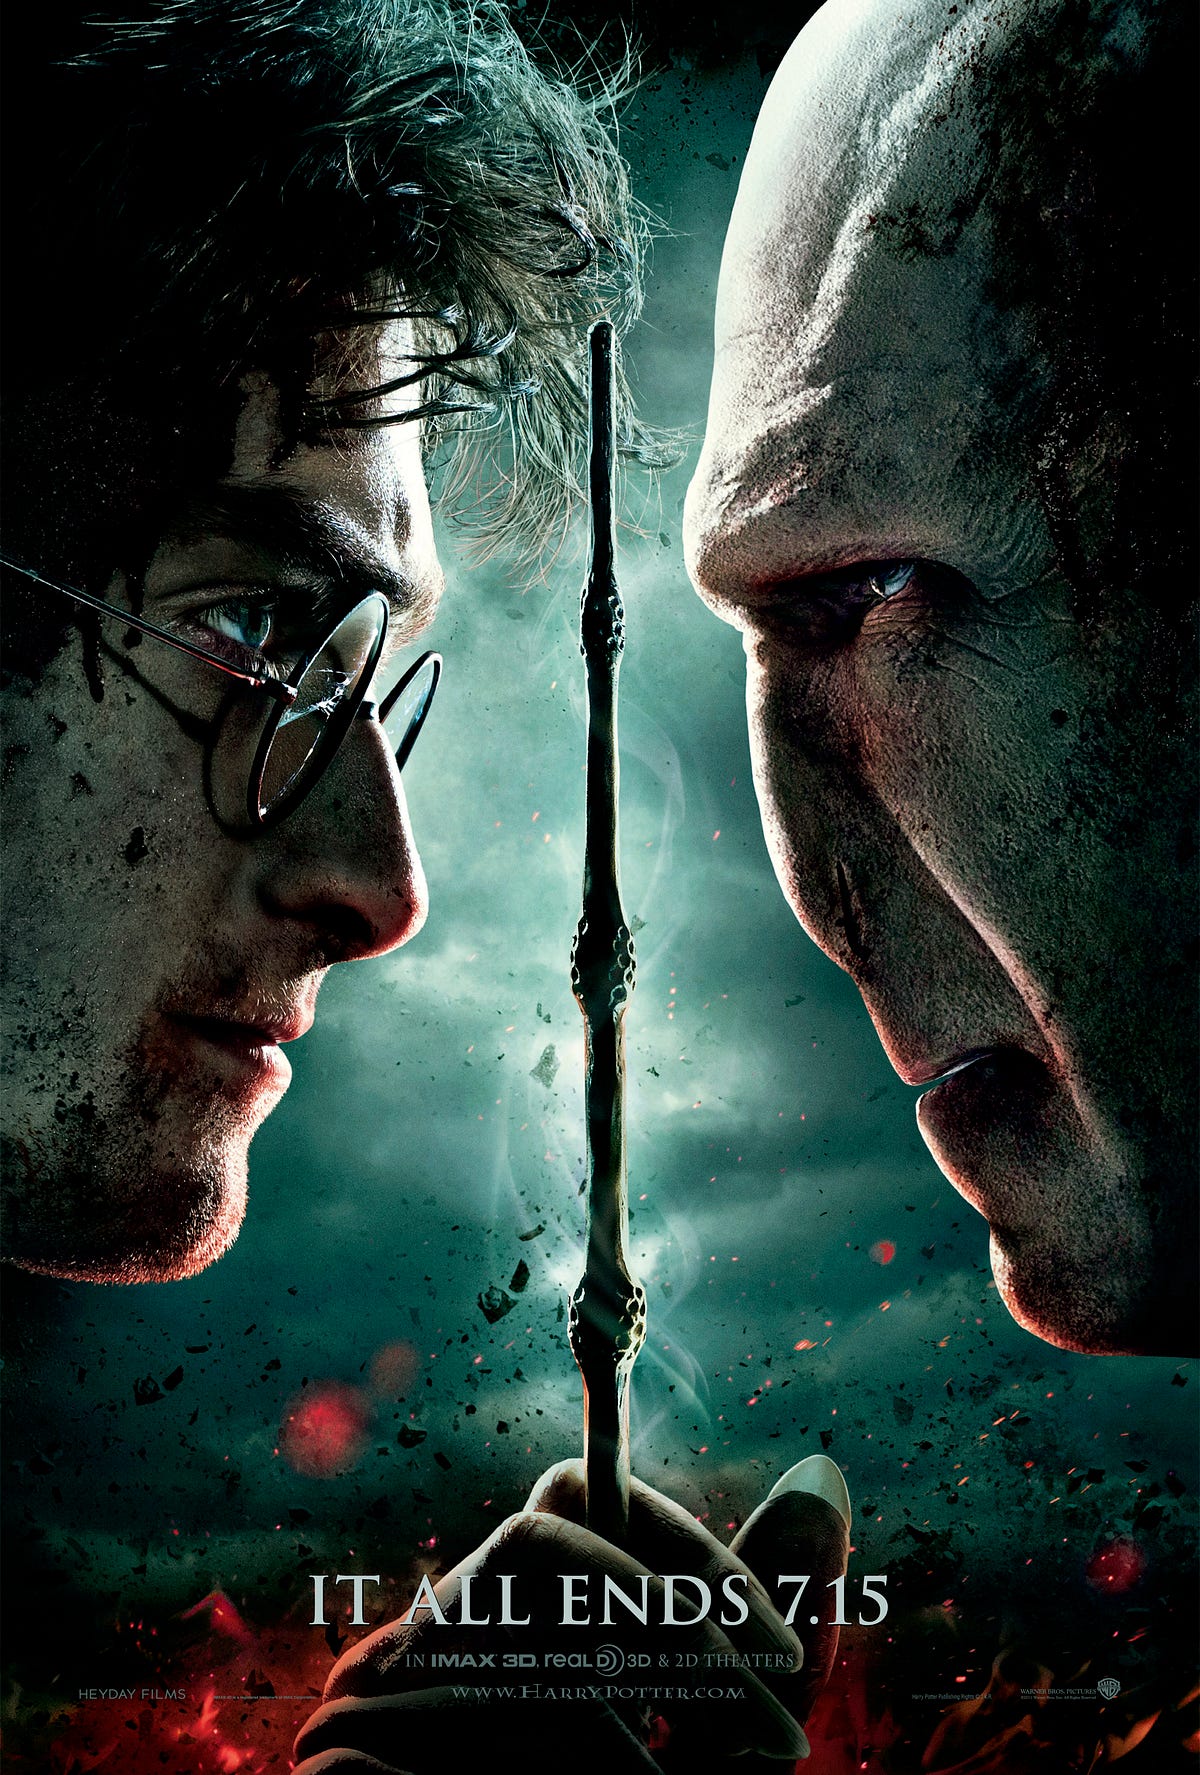 Harry Potter and the Deathly Hallows Part 2 Analysis/Review | by